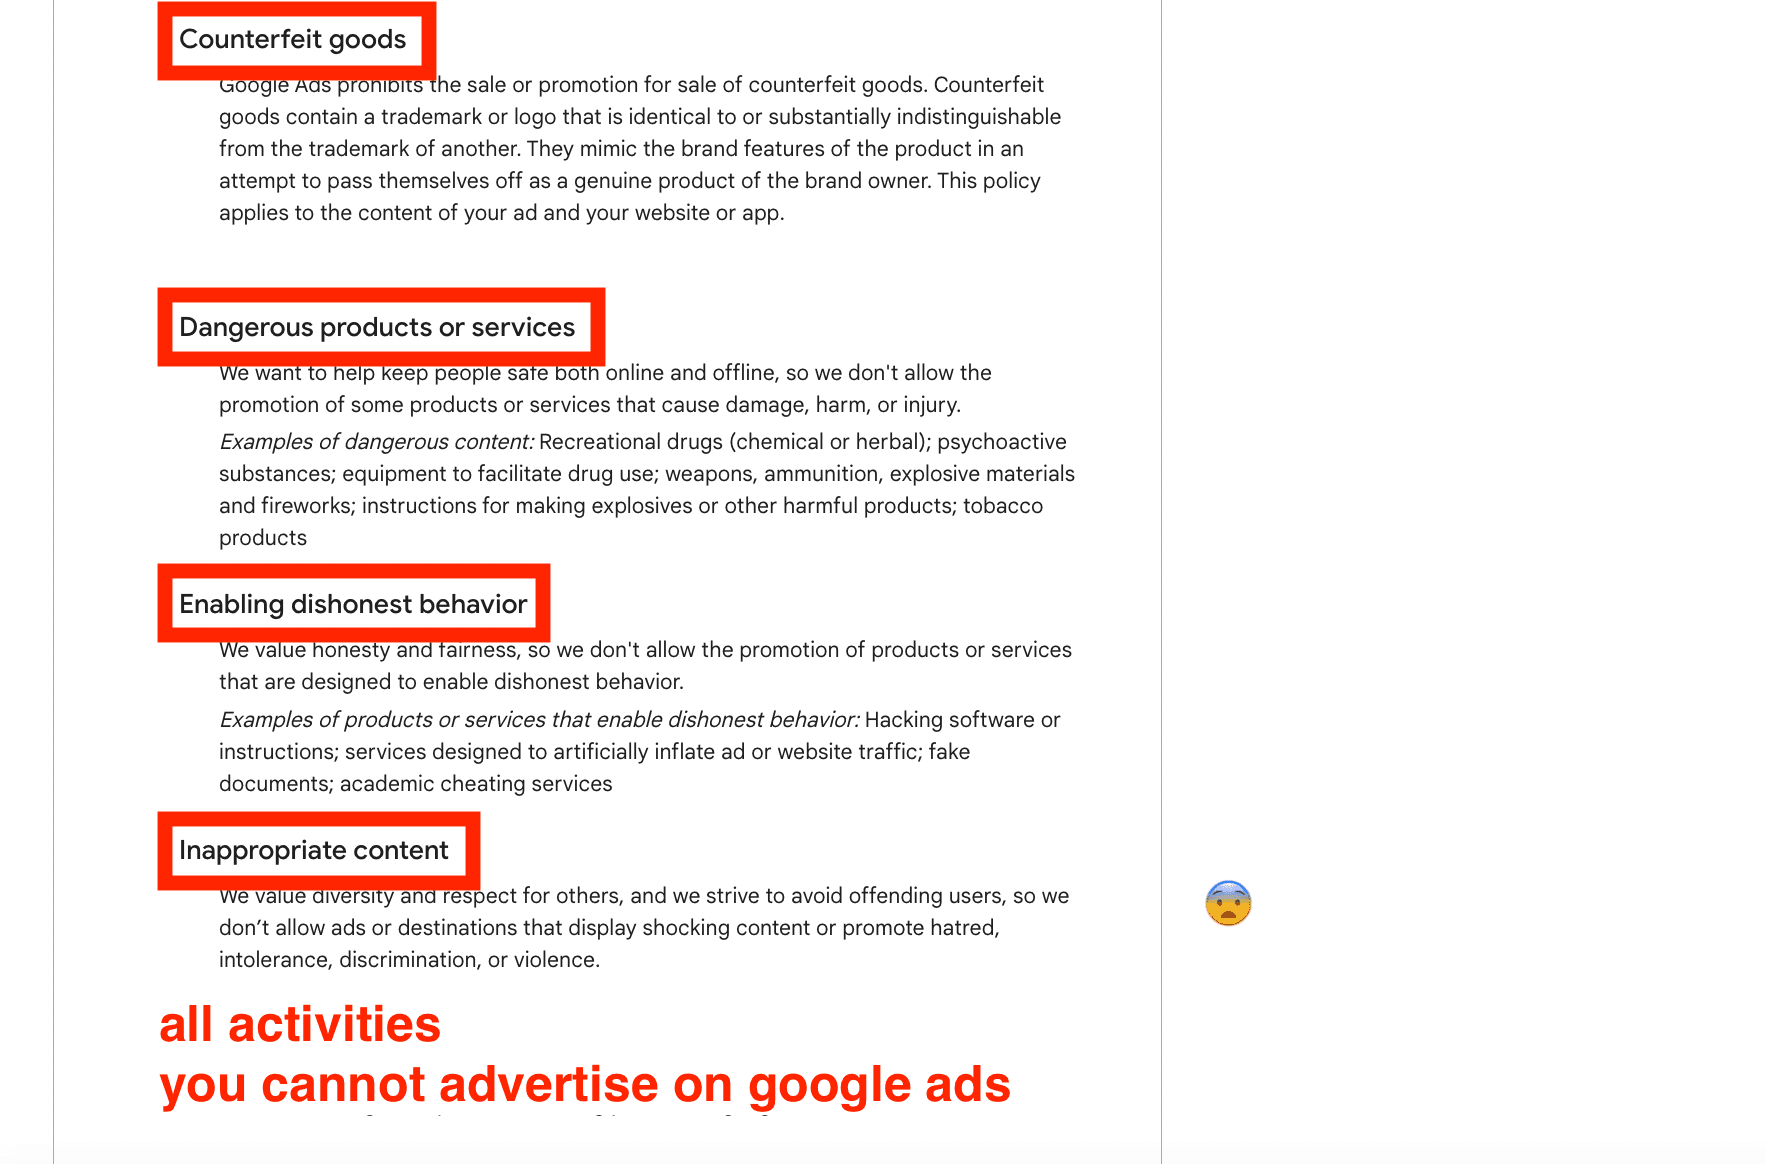 activities you cannot advertise on google ads - image16.png